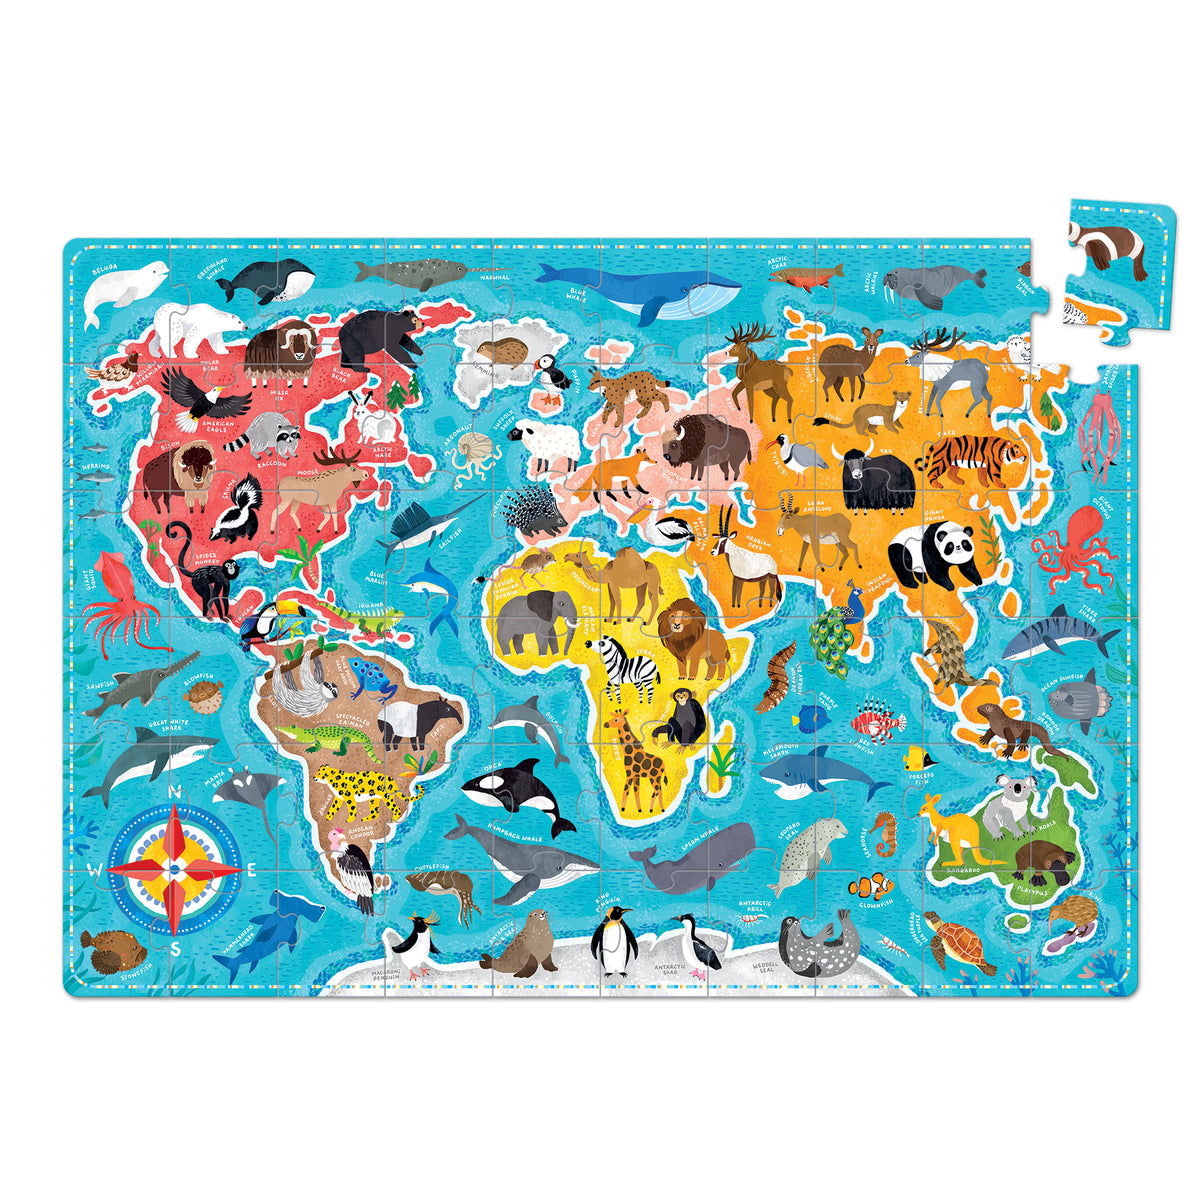 PUZZLE 60 PCS - PUZZLOVE ANIMALS OF THE WORLD